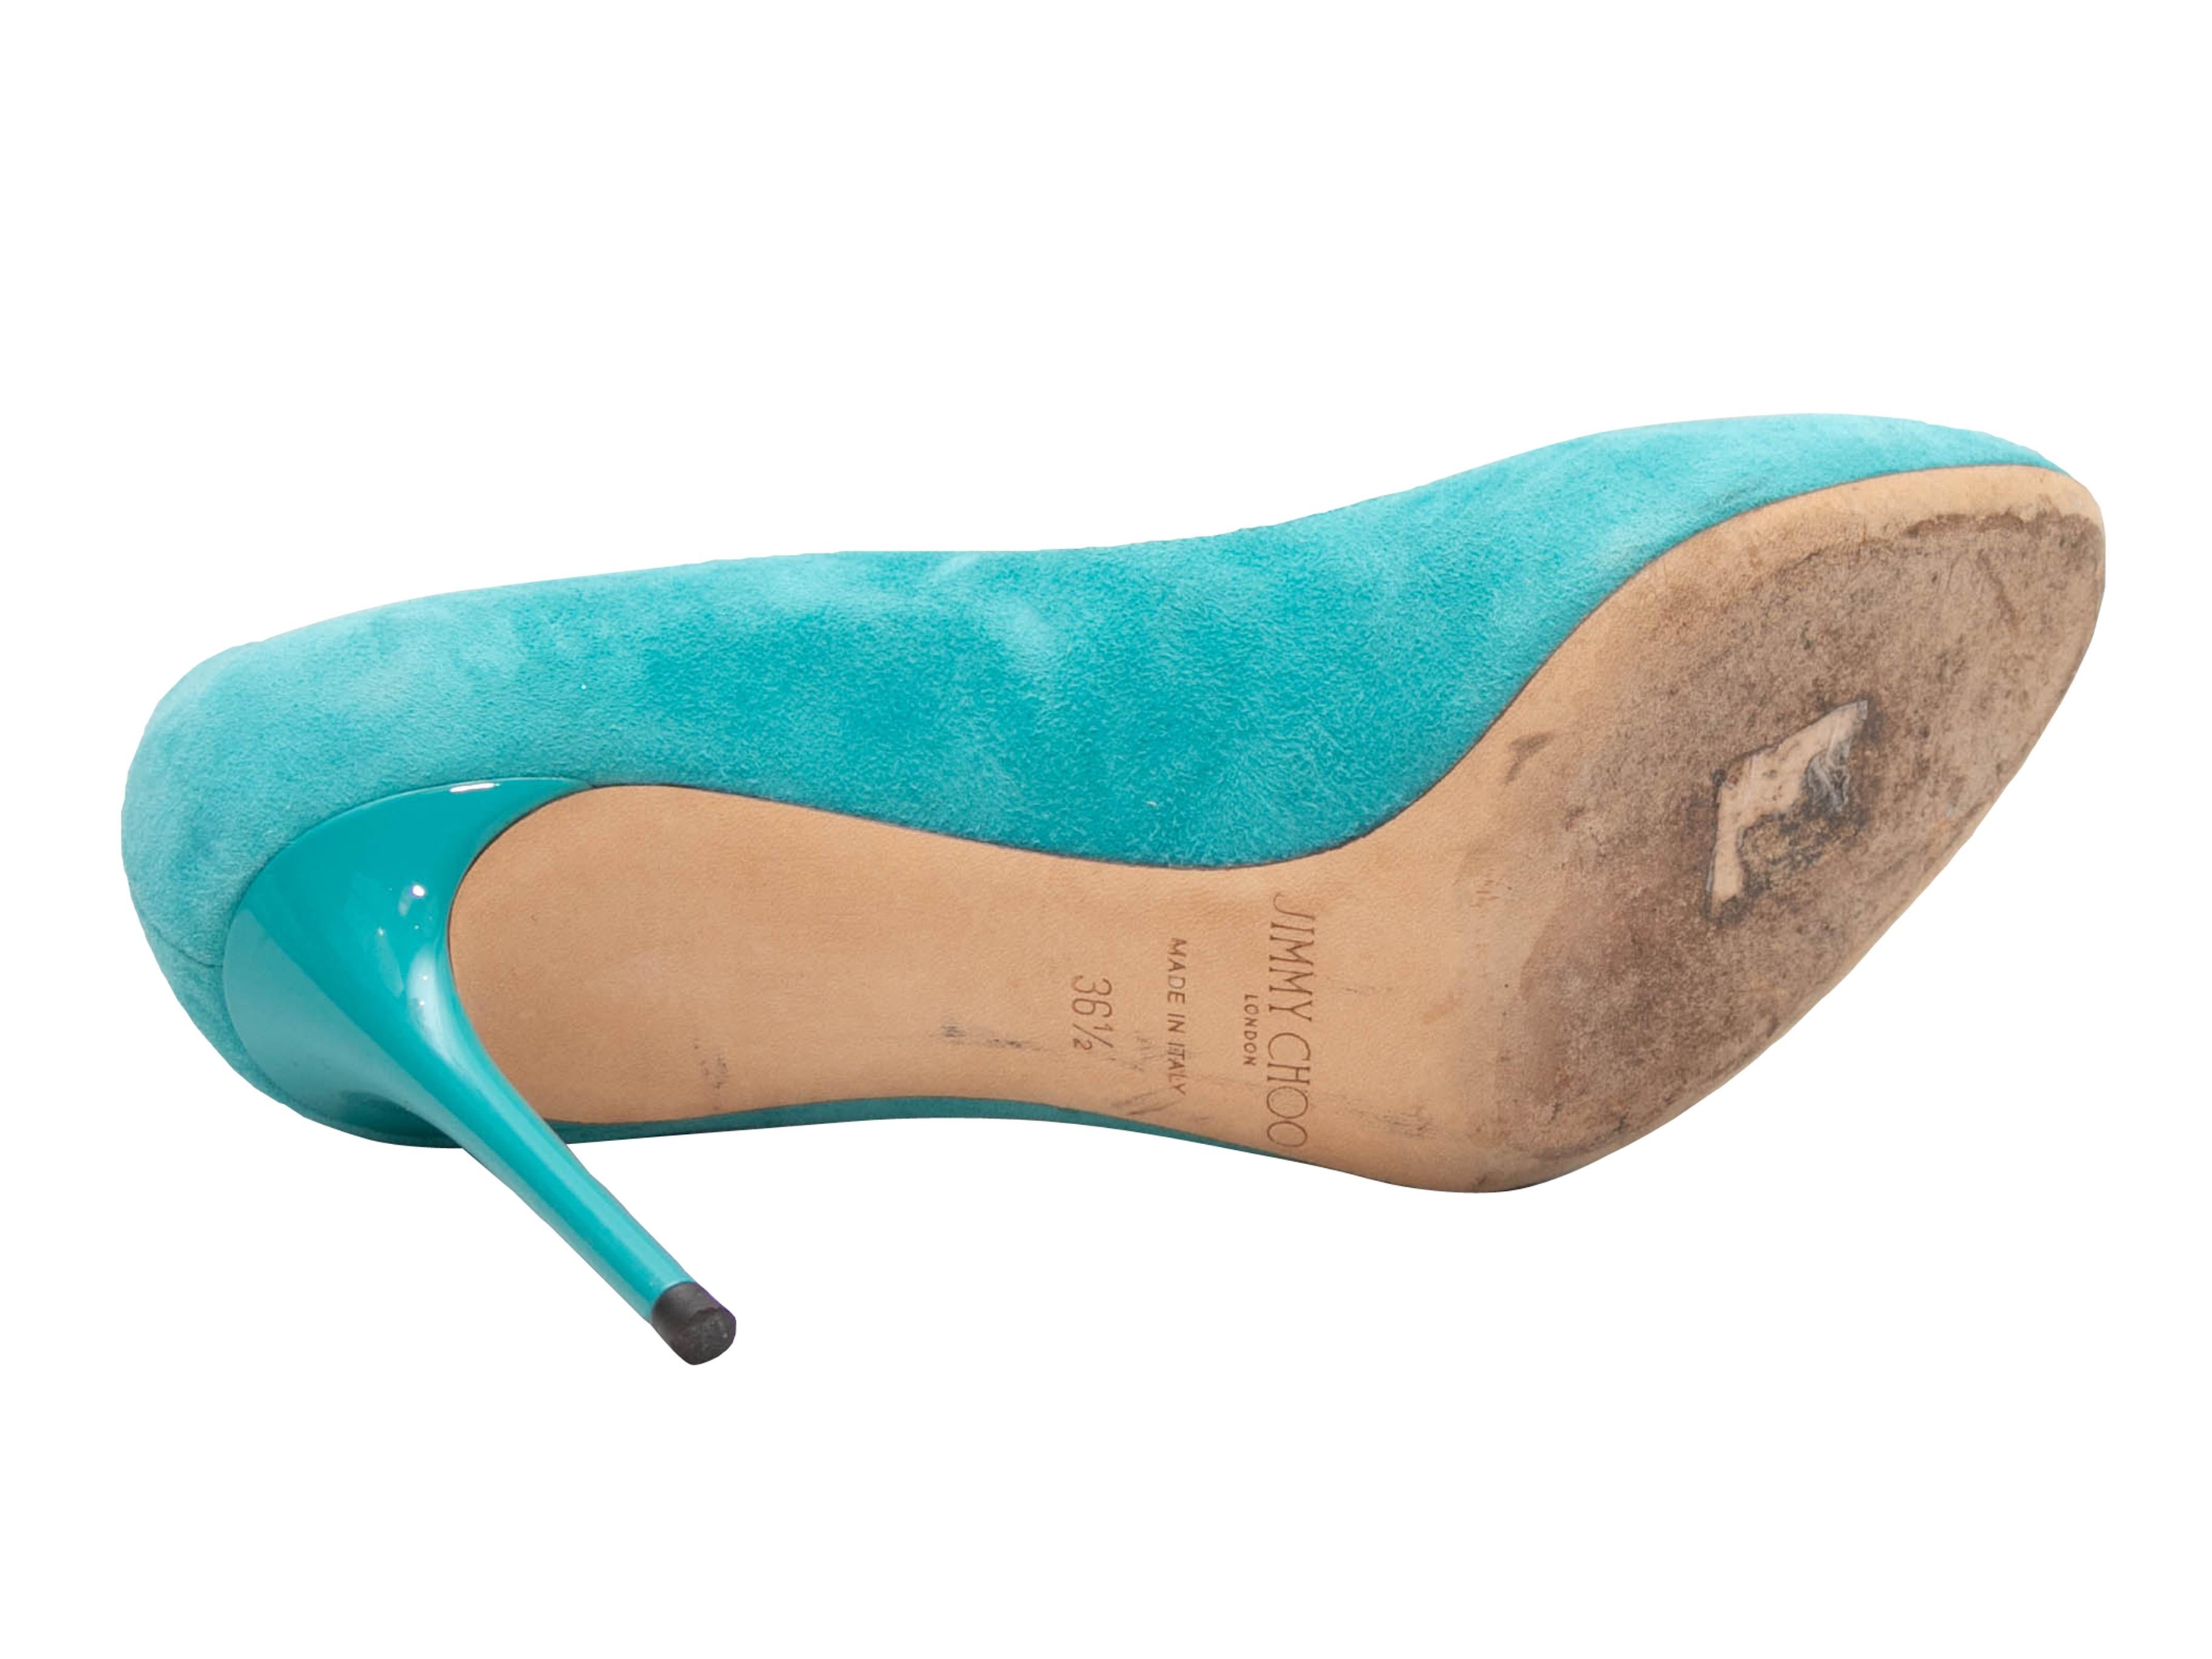 Turquoise Jimmy Choo Esme Suede Pumps Size 6.5 For Sale 1